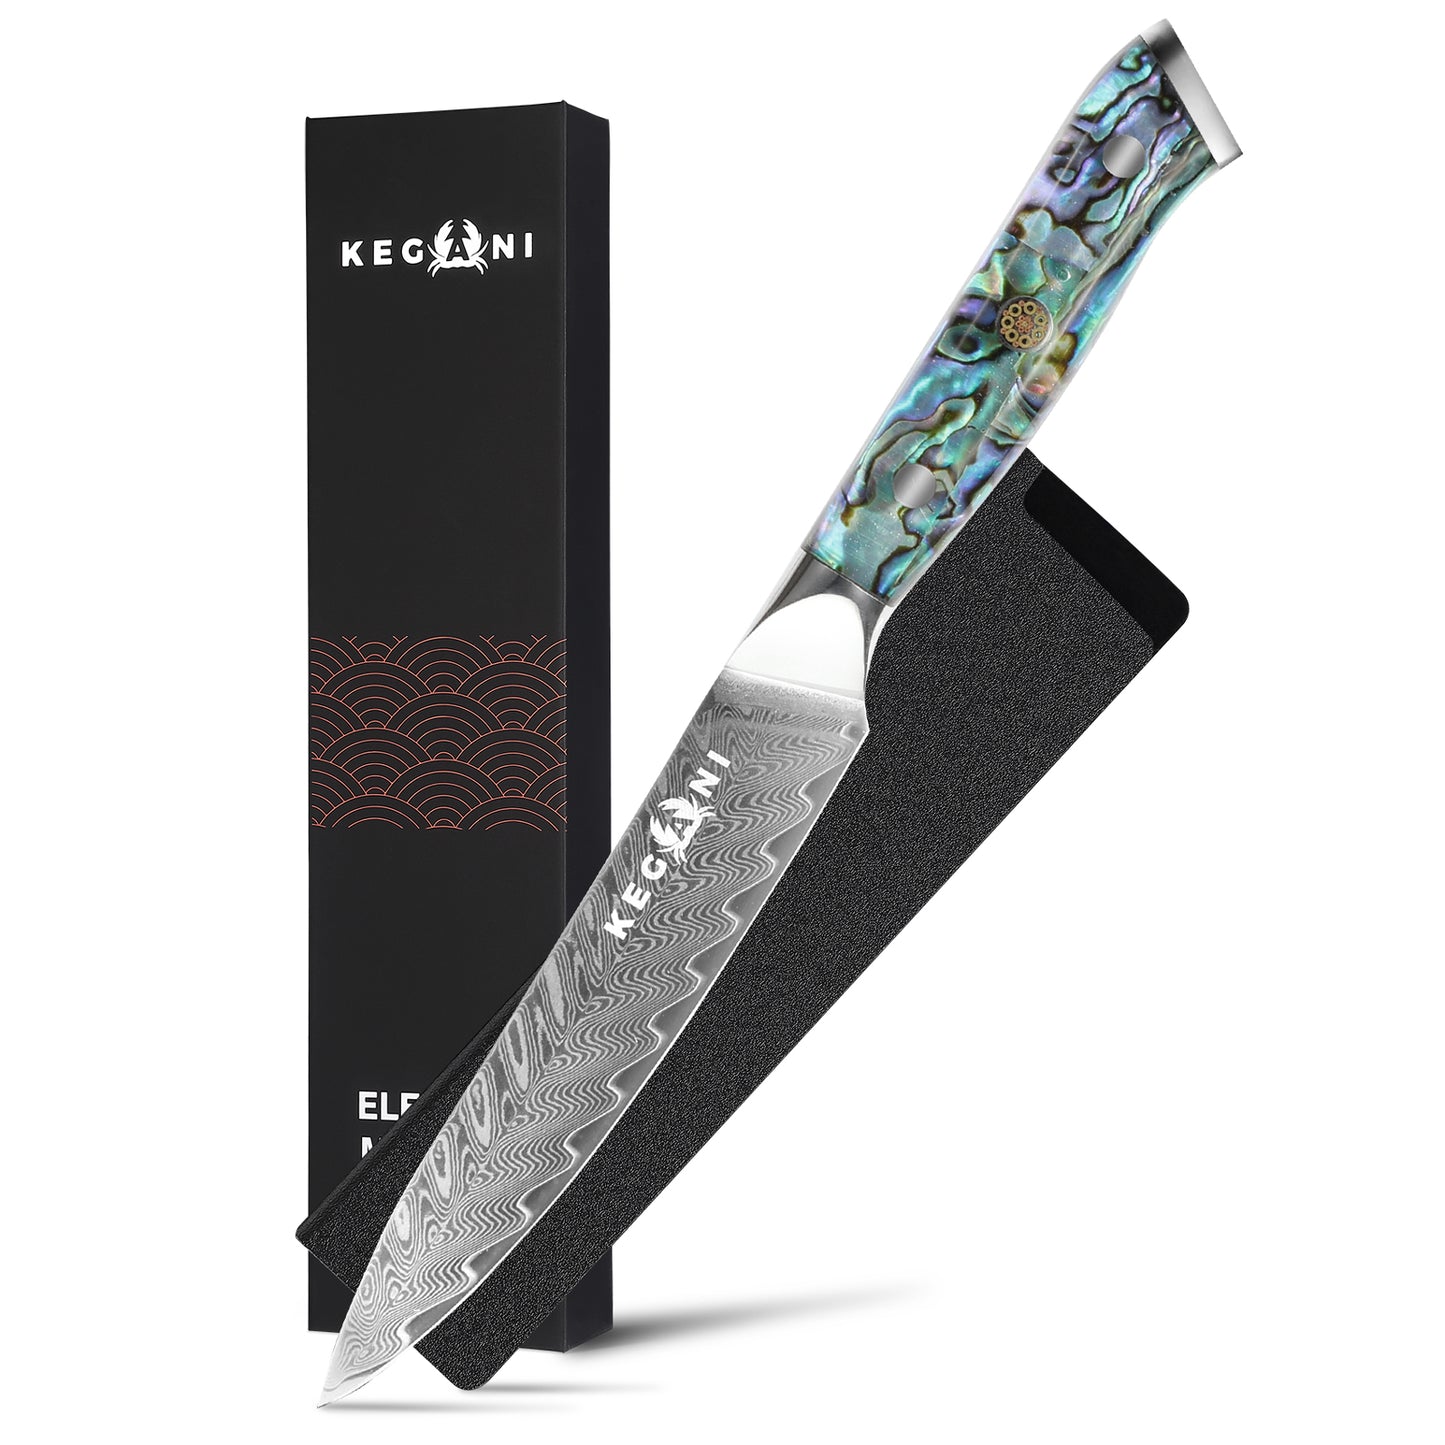 Kegani Damascus Kitchen Utility Knife, 5 Inch Paring Knife With Sheath 67 Layers VG-10 Core Petty Knife, Resin Handle Real Shell Filled FullTang Handle Fruit And Vegetable Knives